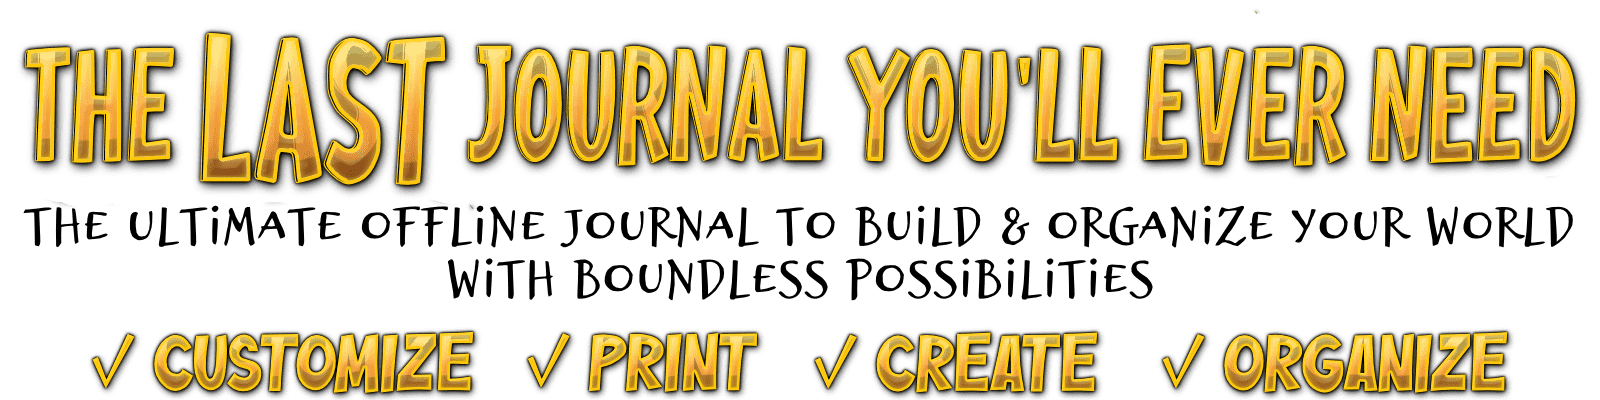 Grab your boundless journal today, because you deserve it.